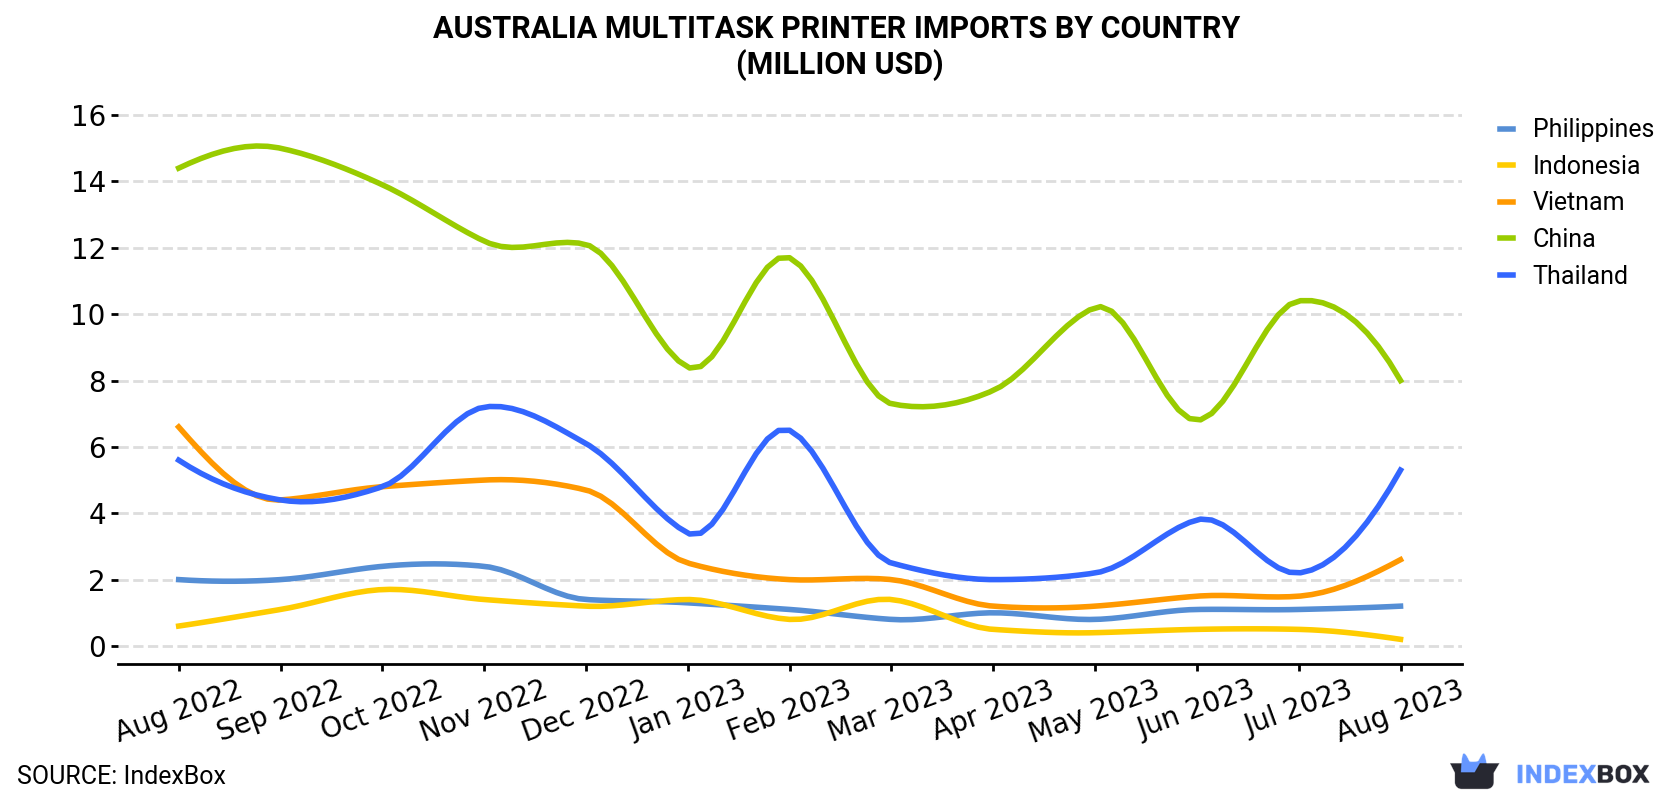 Australia Multitask Printer Imports By Country (Million USD)